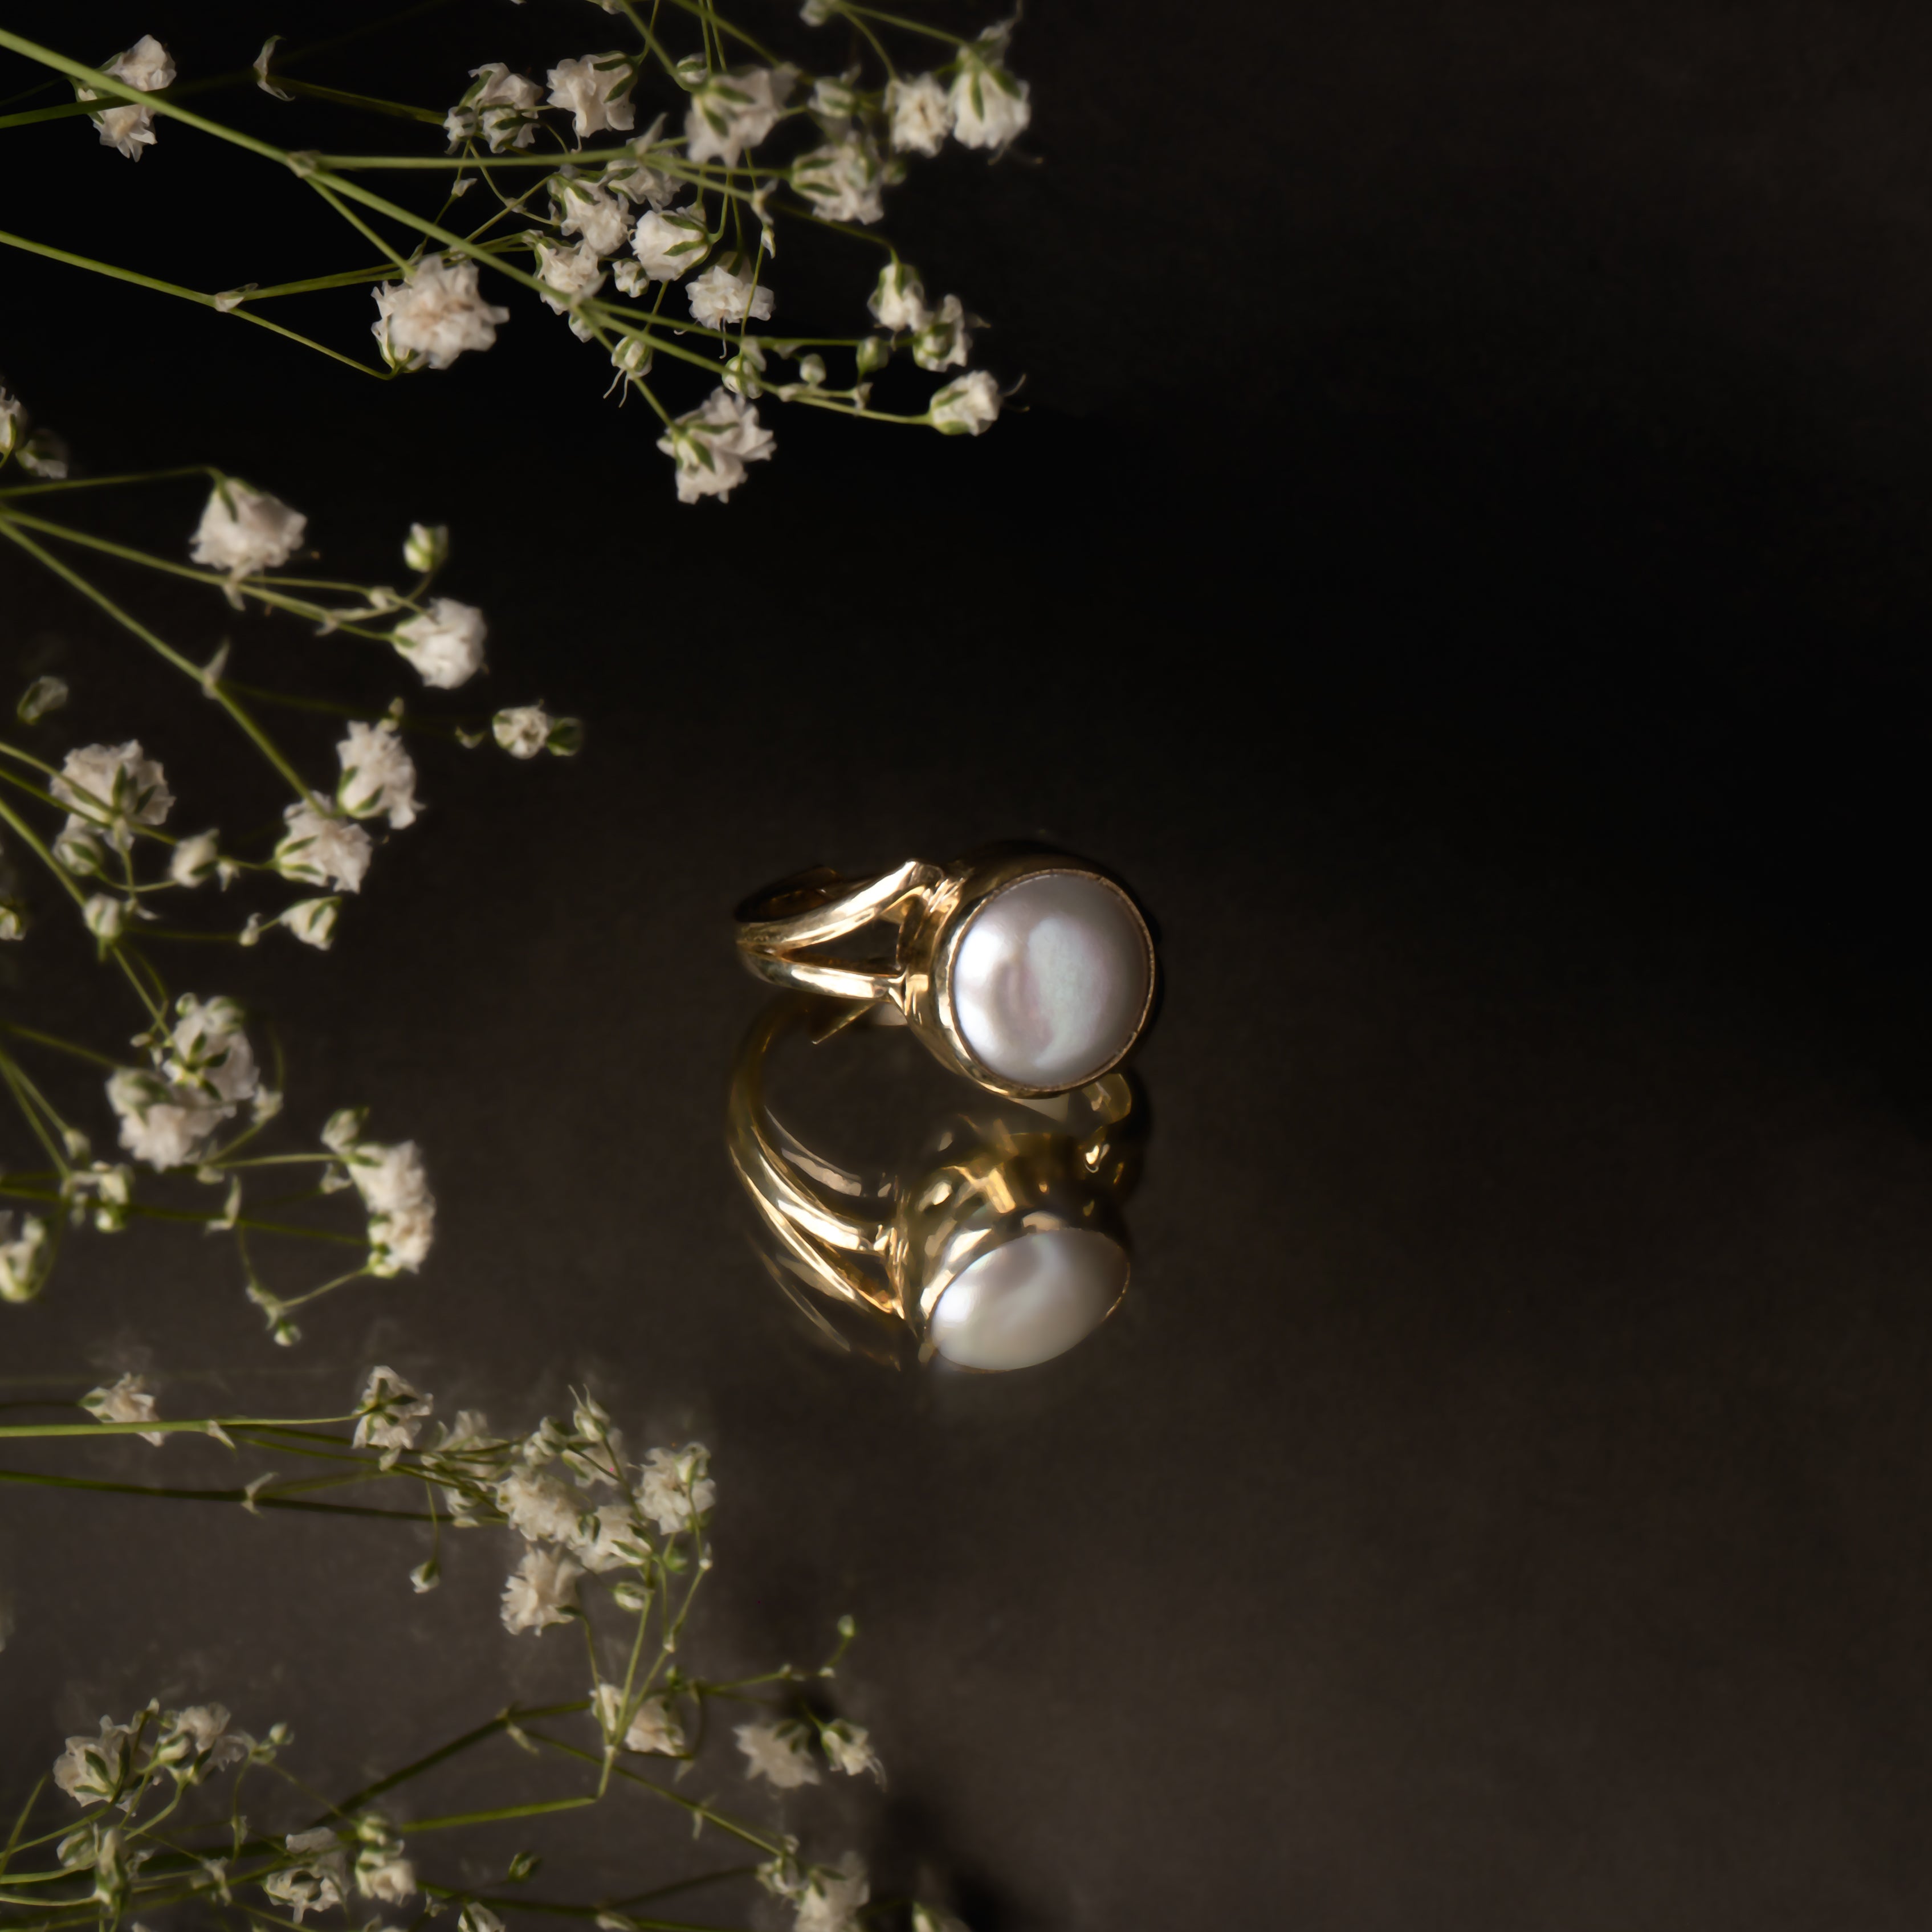 Moti (White Pearl): Astrologically beneficial or just a jewellery?